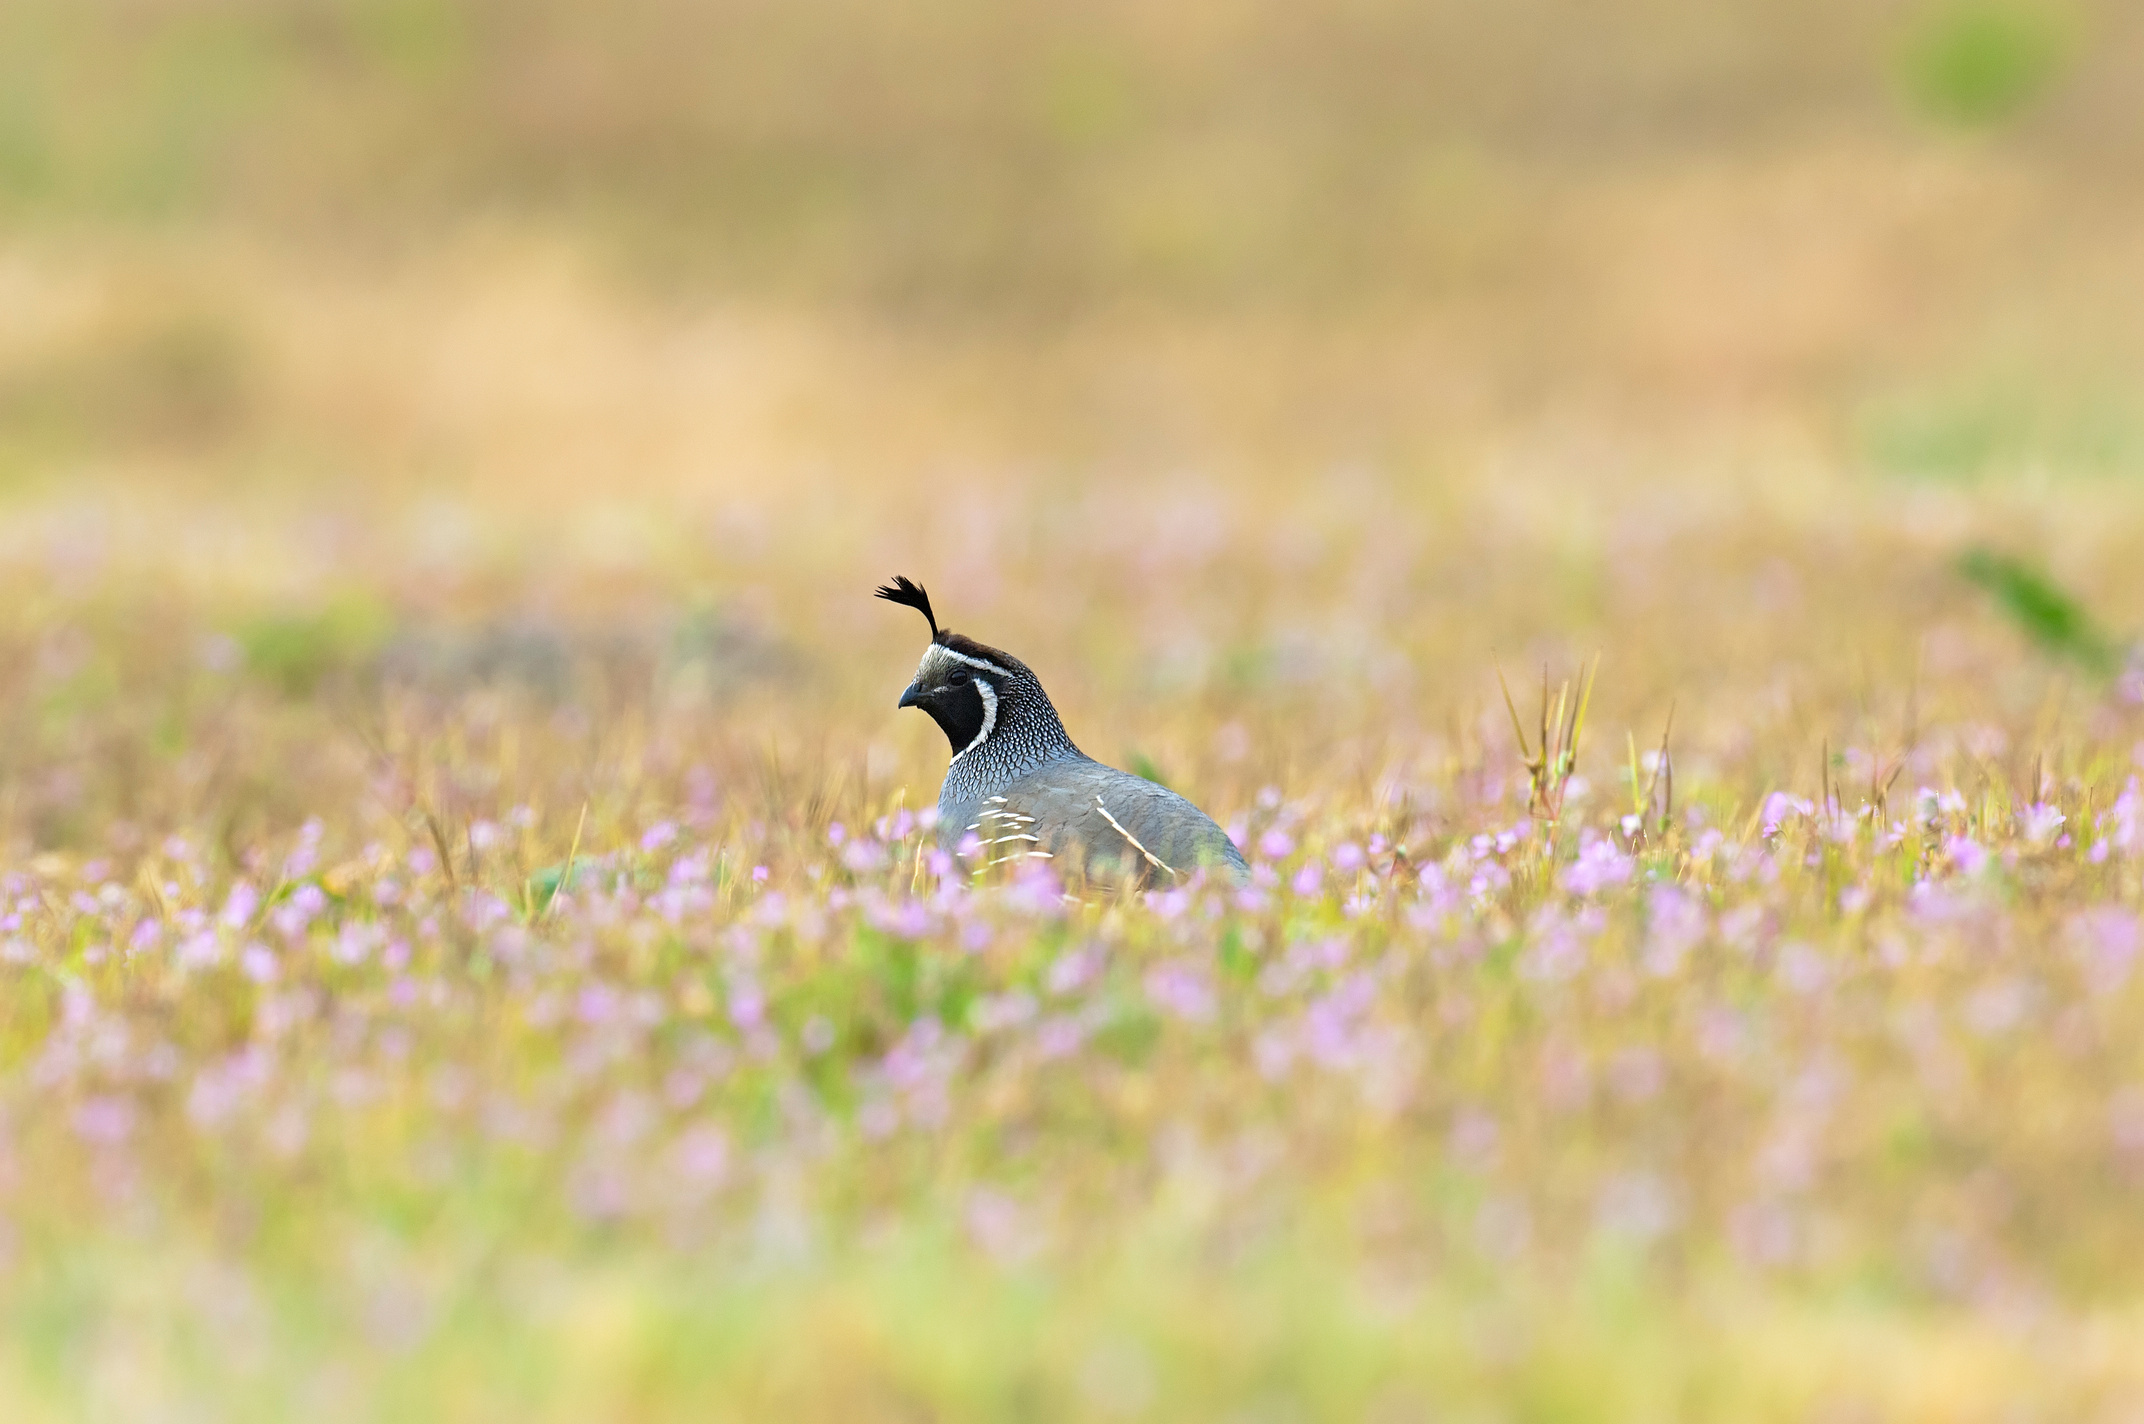 A California quail is standing in a field of purple flowers.